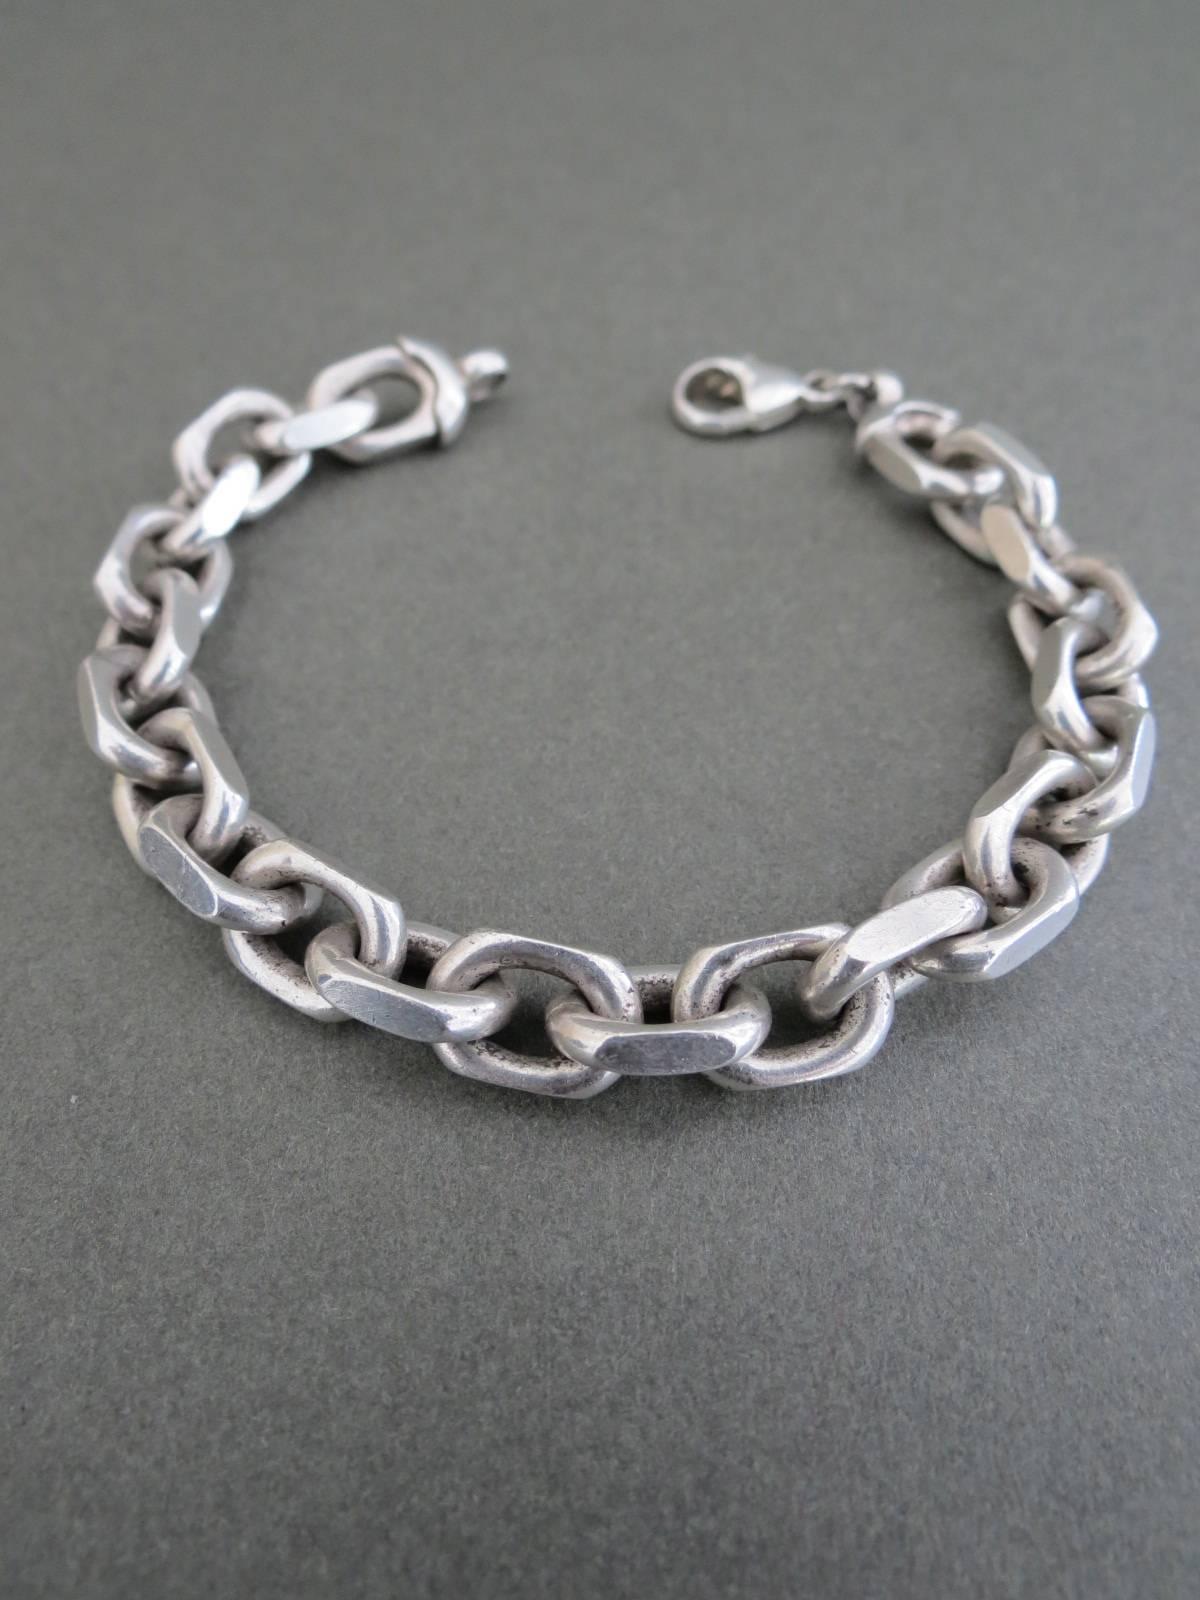 This is lovely Danish silver link chain bracelet.
Item Specifics
Length: 21cm (approx 8.00